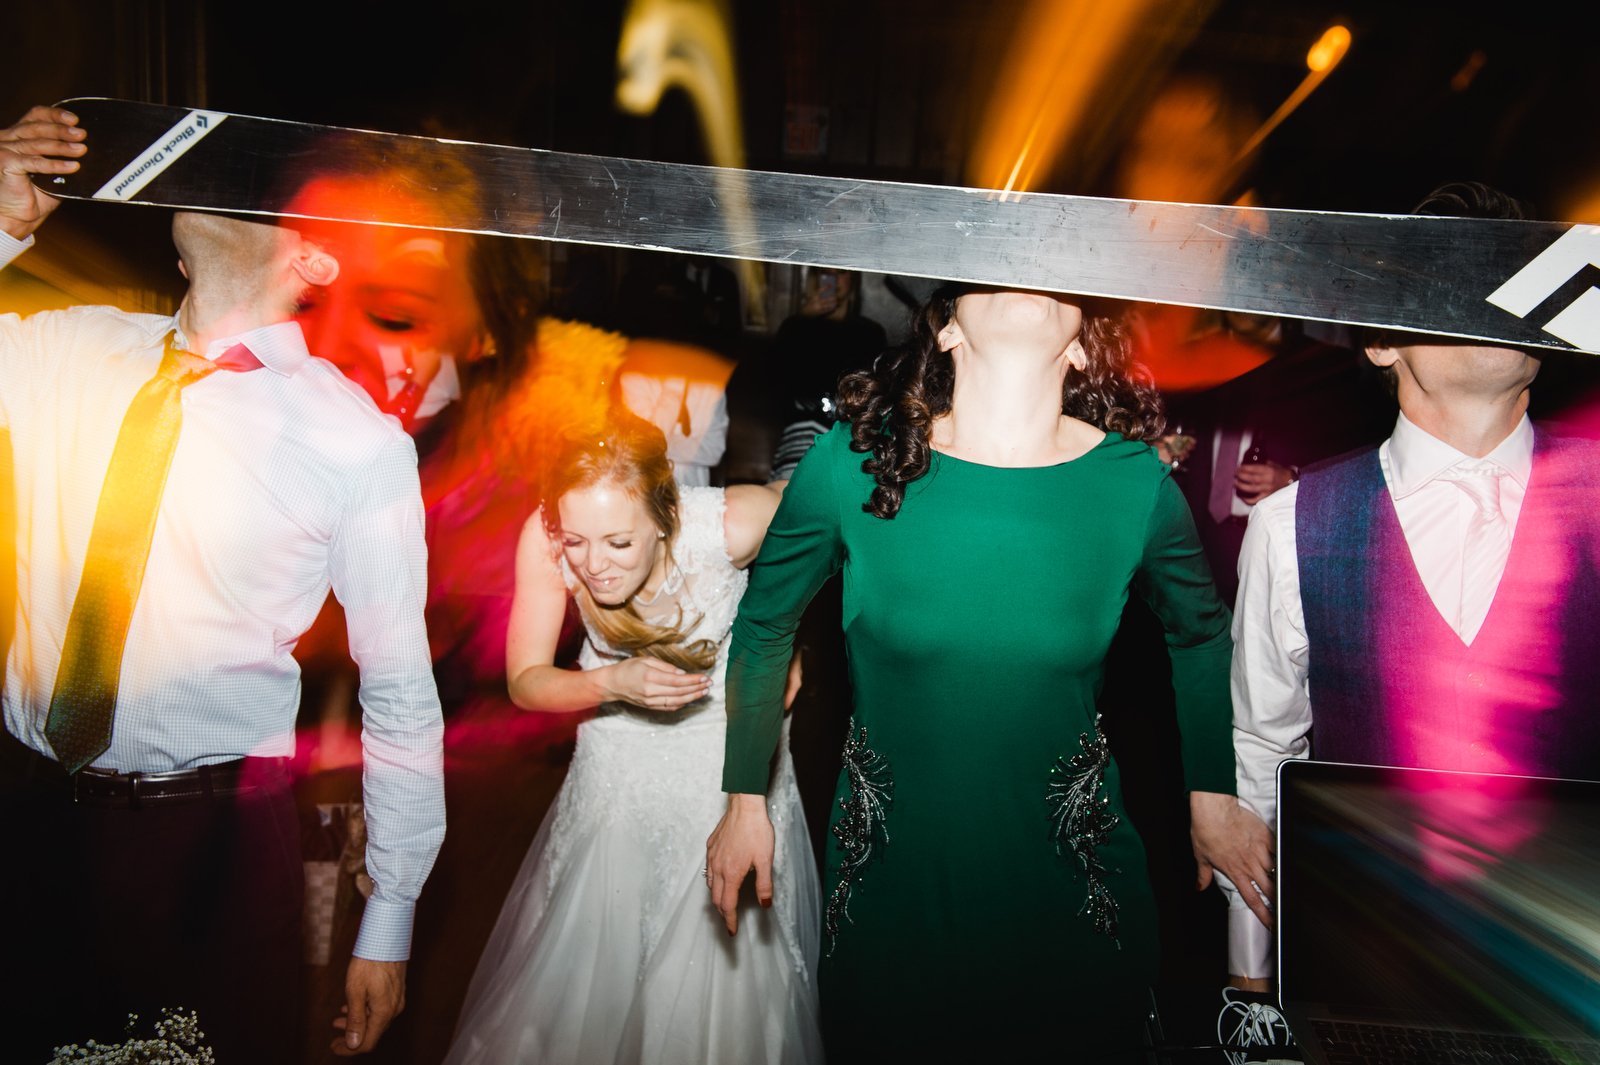 the shot-ski game to get the bride and groom to kiss